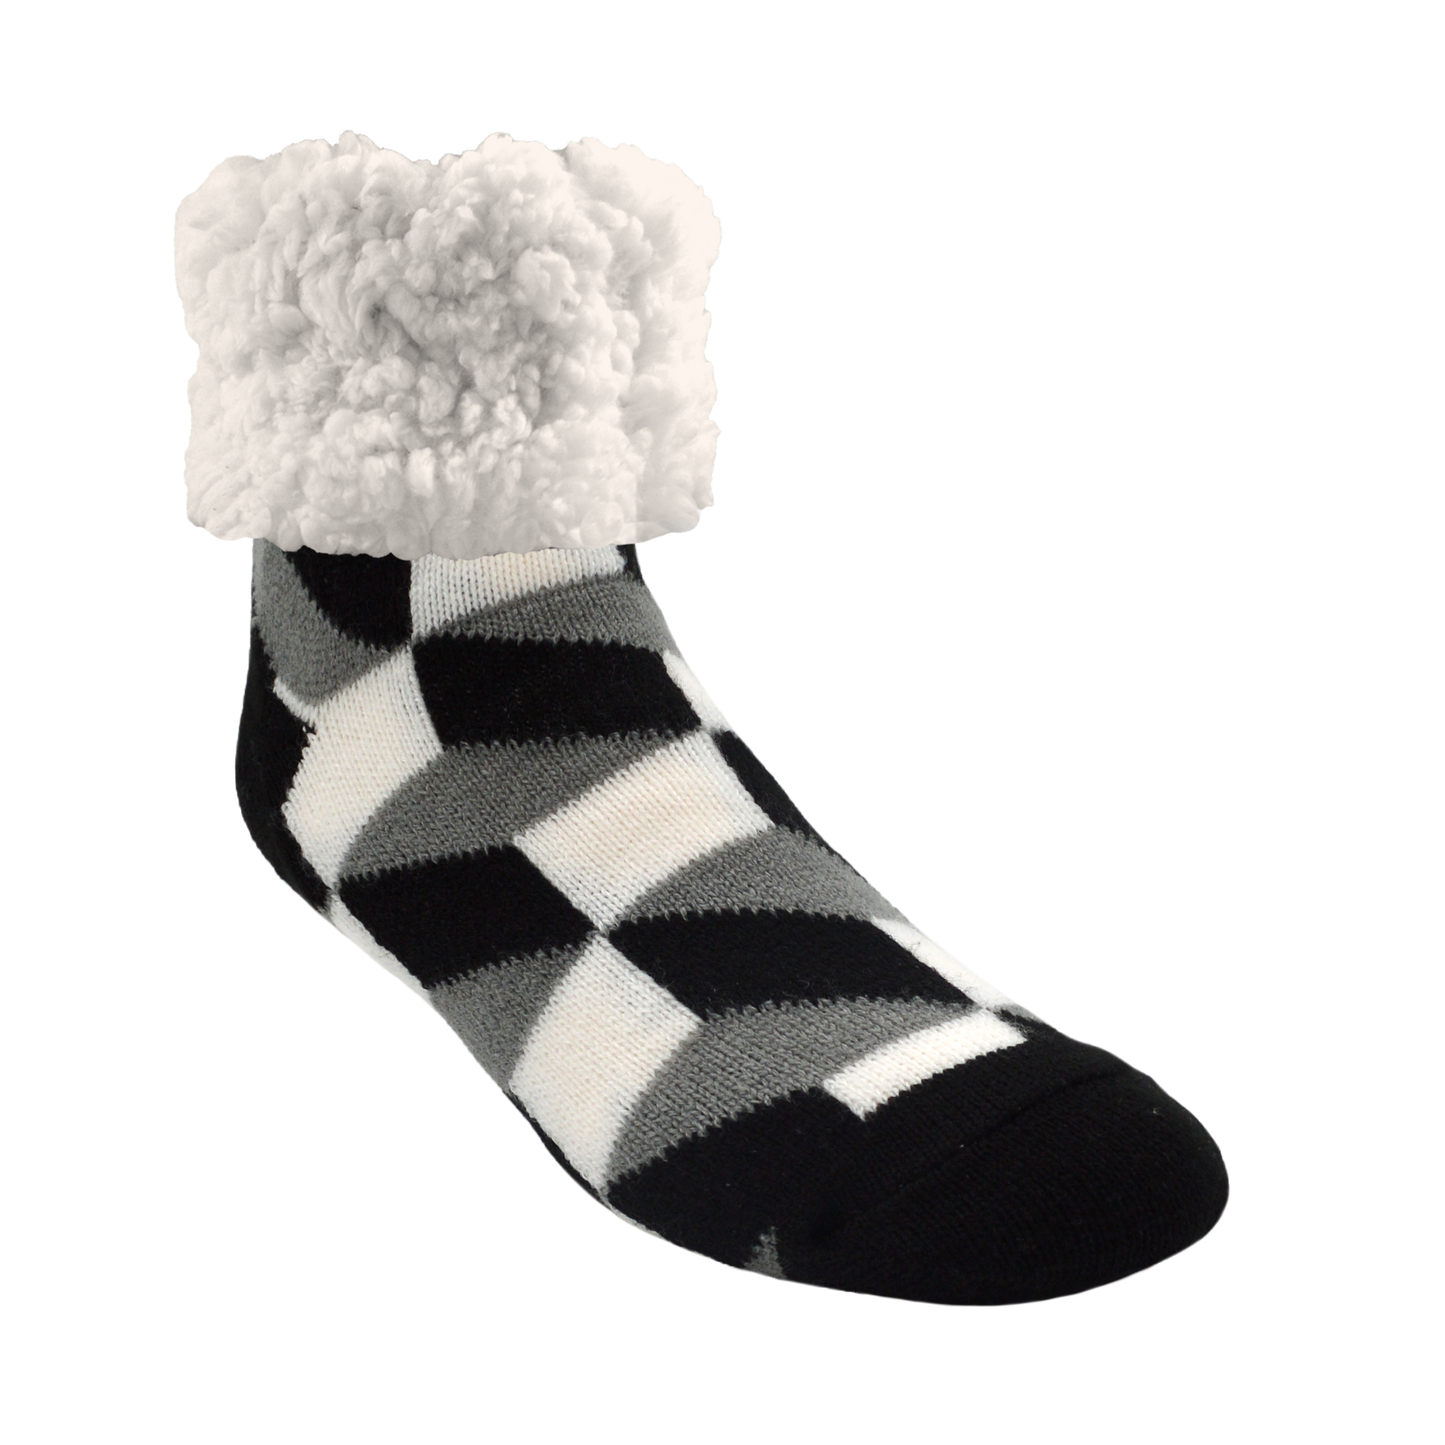 Pudus Cozy Winter Slipper Socks for Women and Men with Non-Slip Grippers and Faux Fur Sherpa Fleece - Adult Regular Fuzzy Socks in Checkerbox Black - Classic Slipper Sock